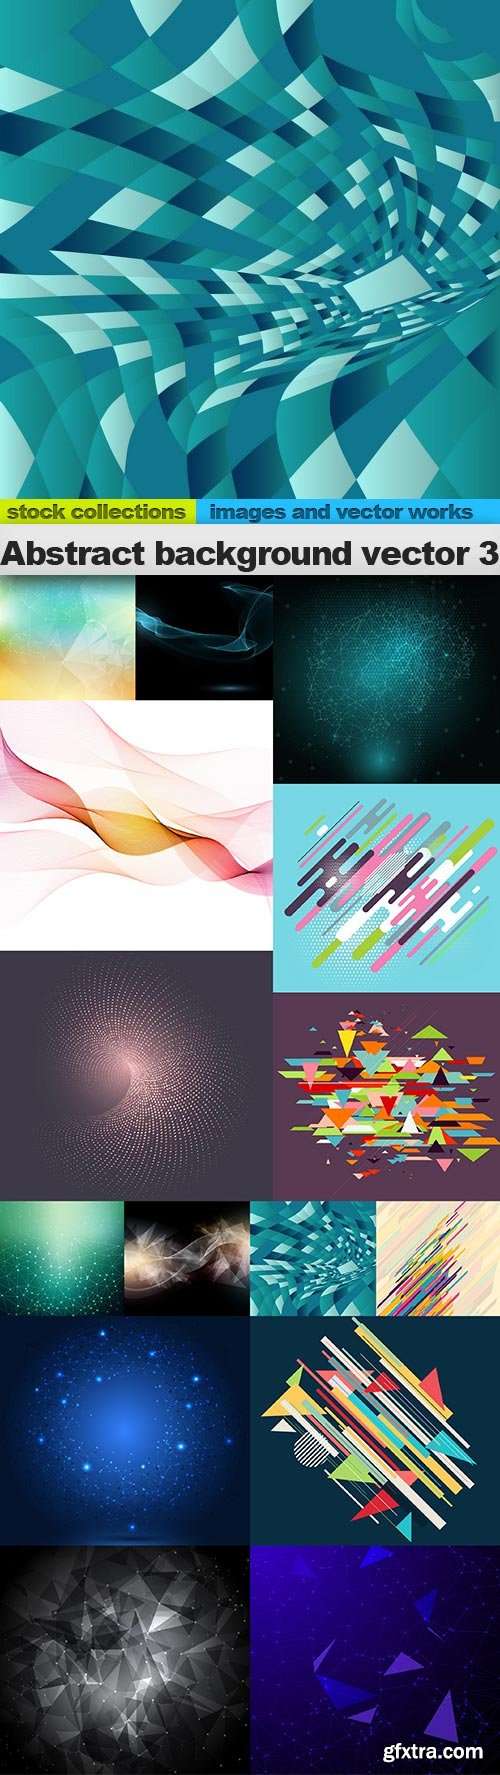 Abstract background vector 3, 15 x EPS